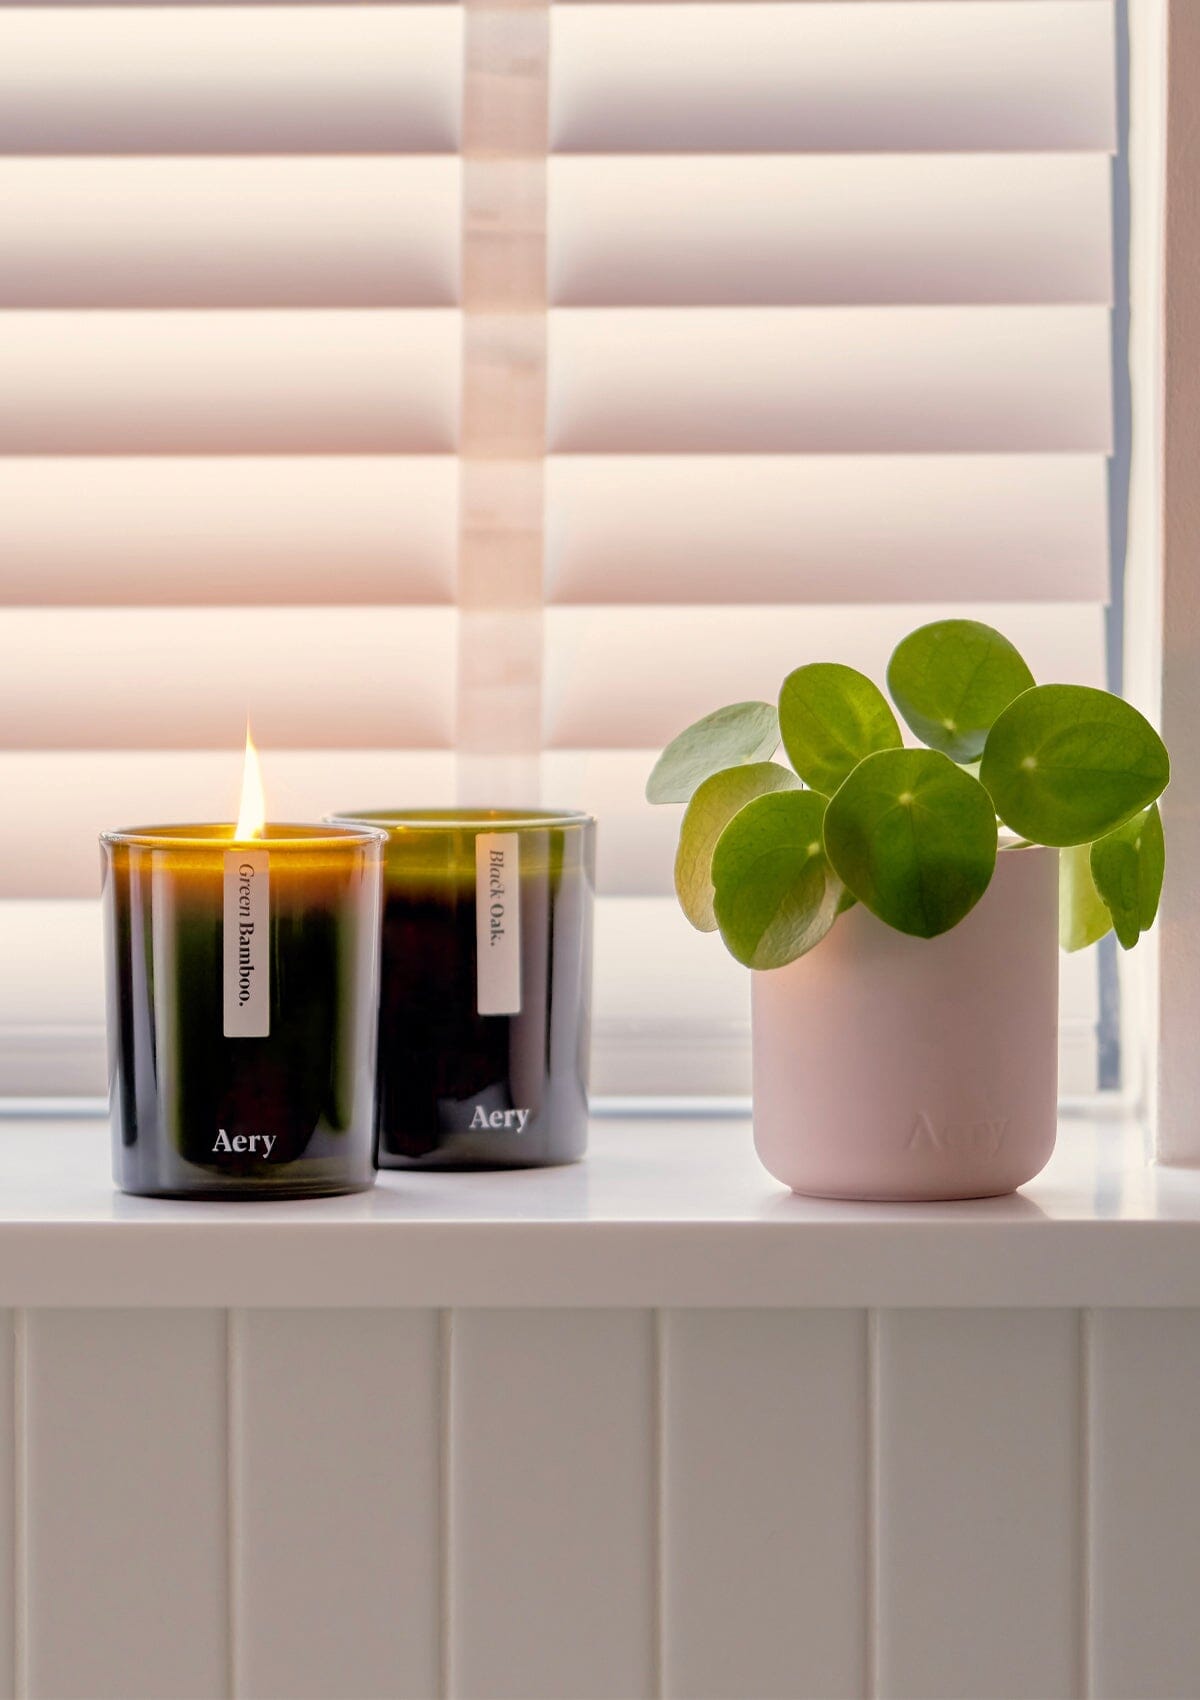 Green Bamboo candle by aery displayed next to black oak and pink aery plant pot sat on white window seal 